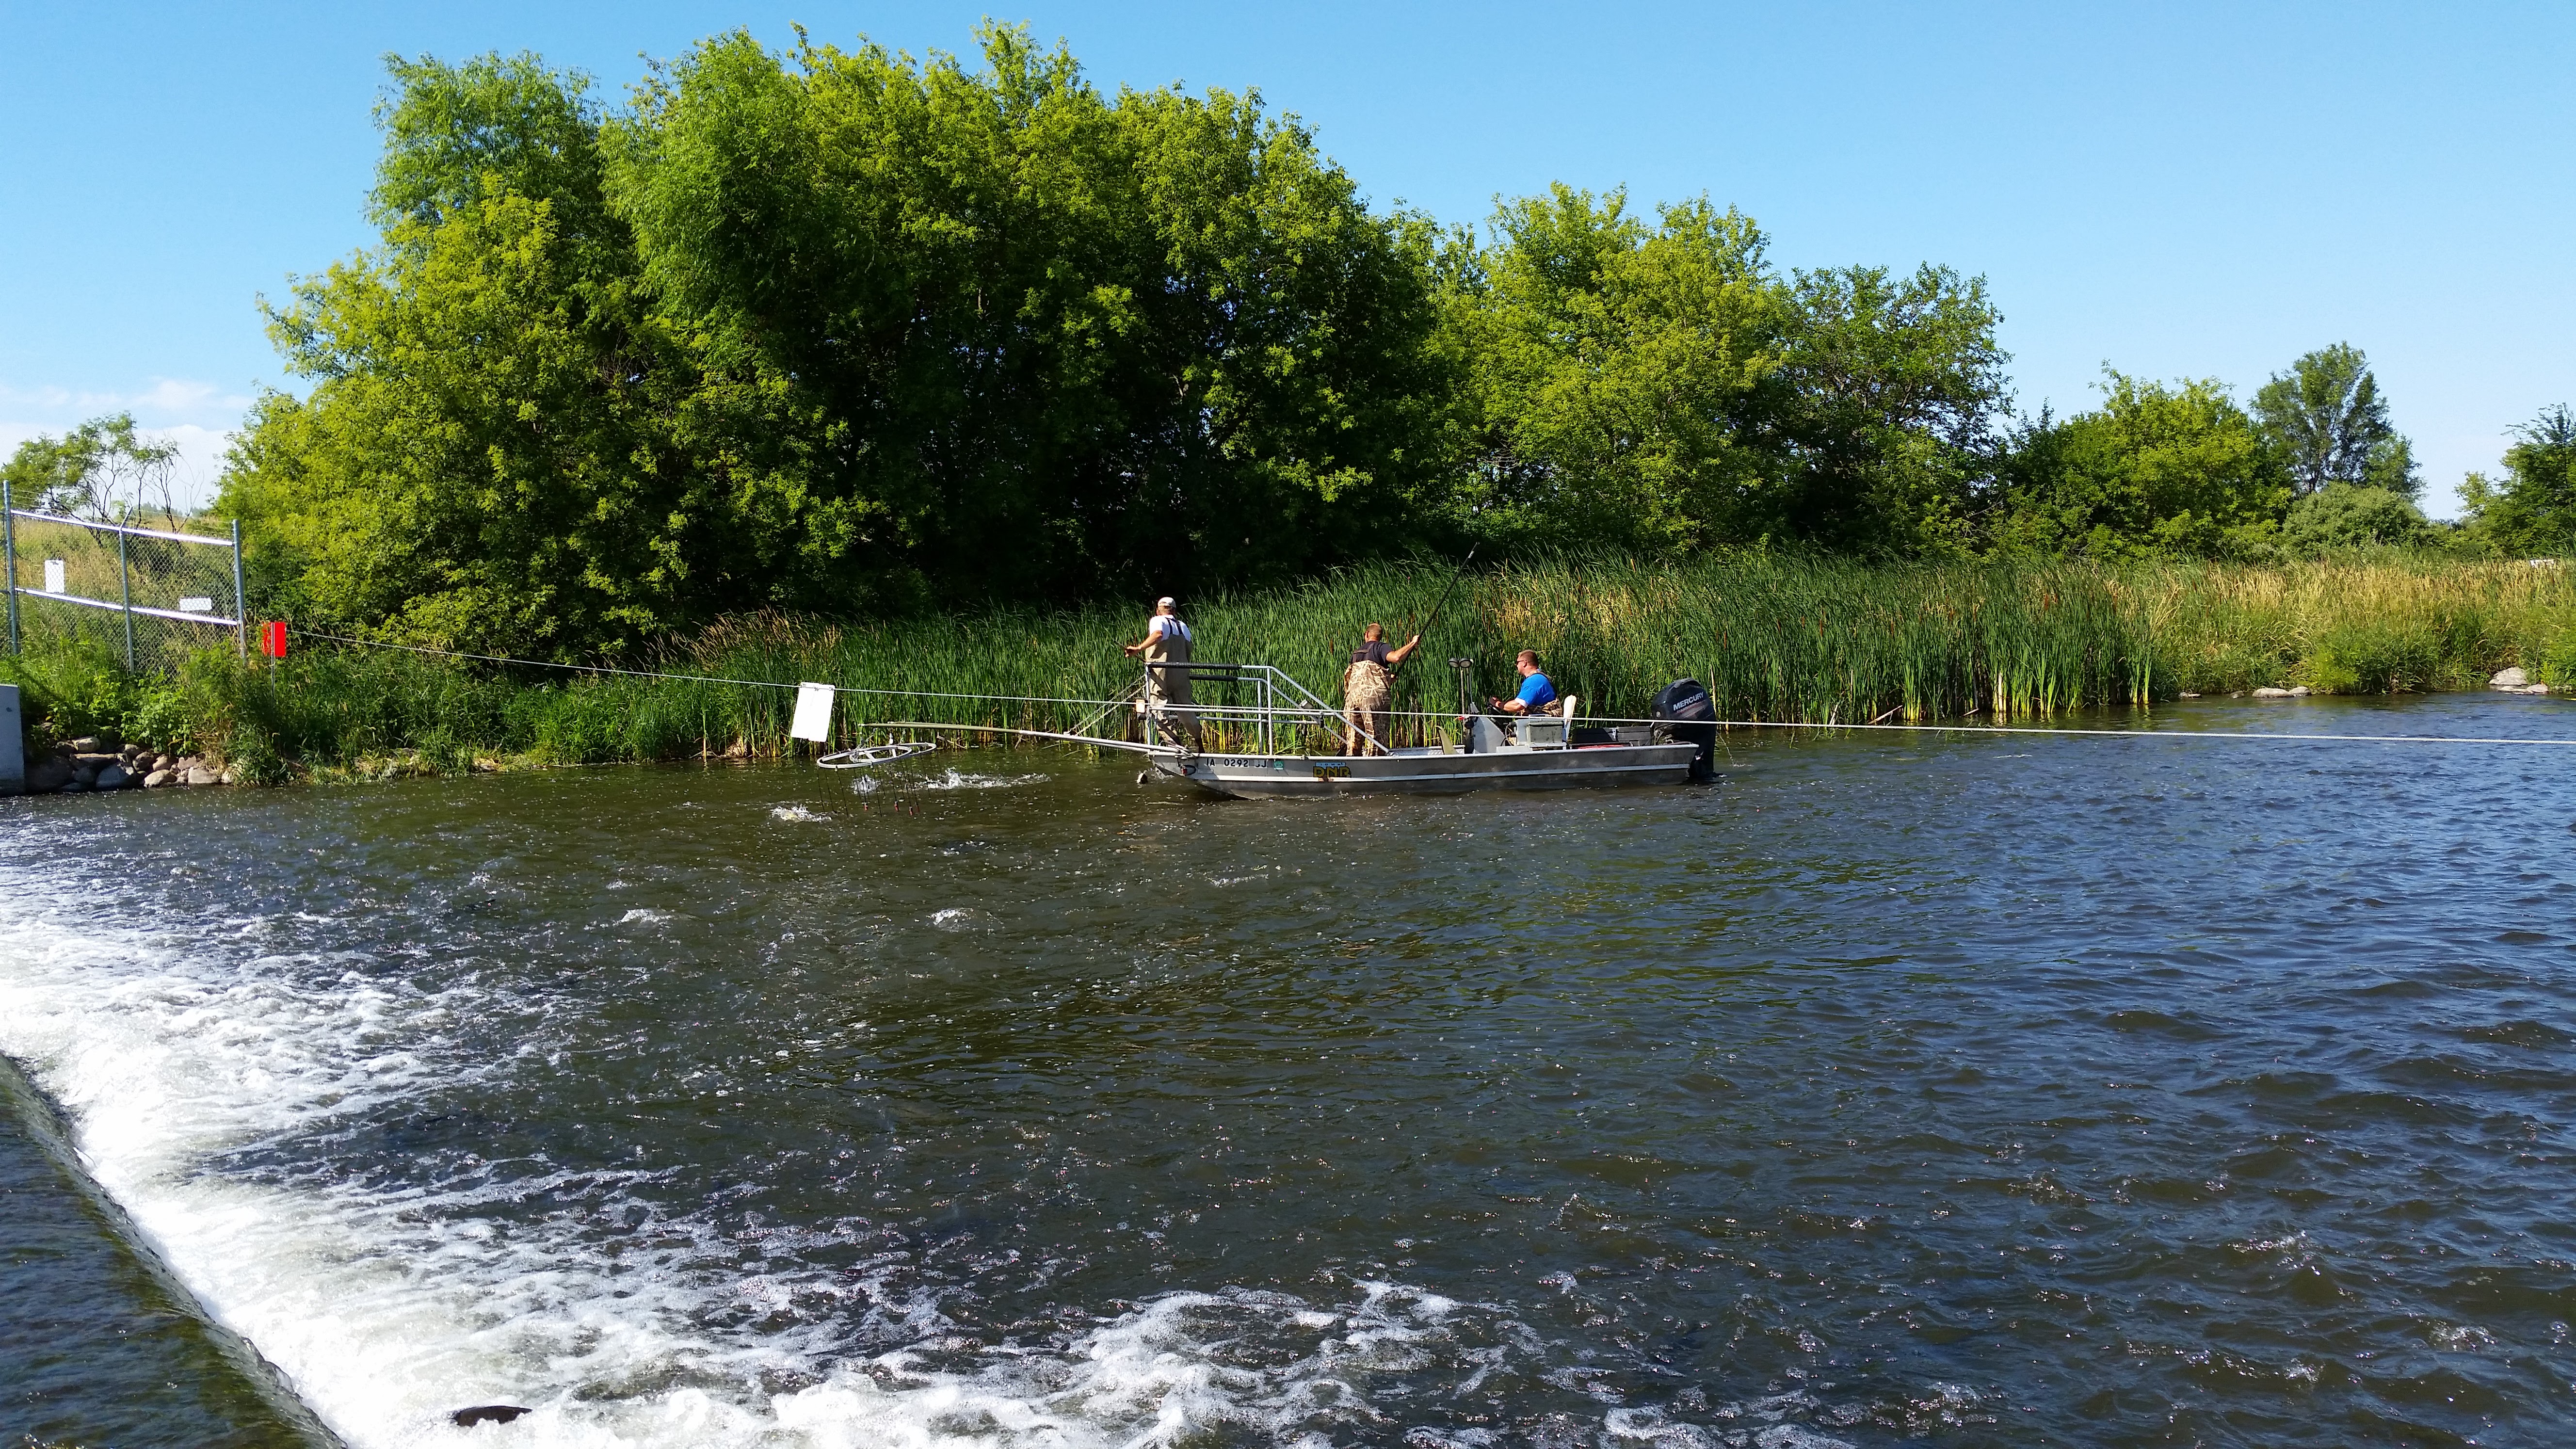 DNR fisheries staff sampling for walleye and muskellunge in the Iowa Great Lakes.